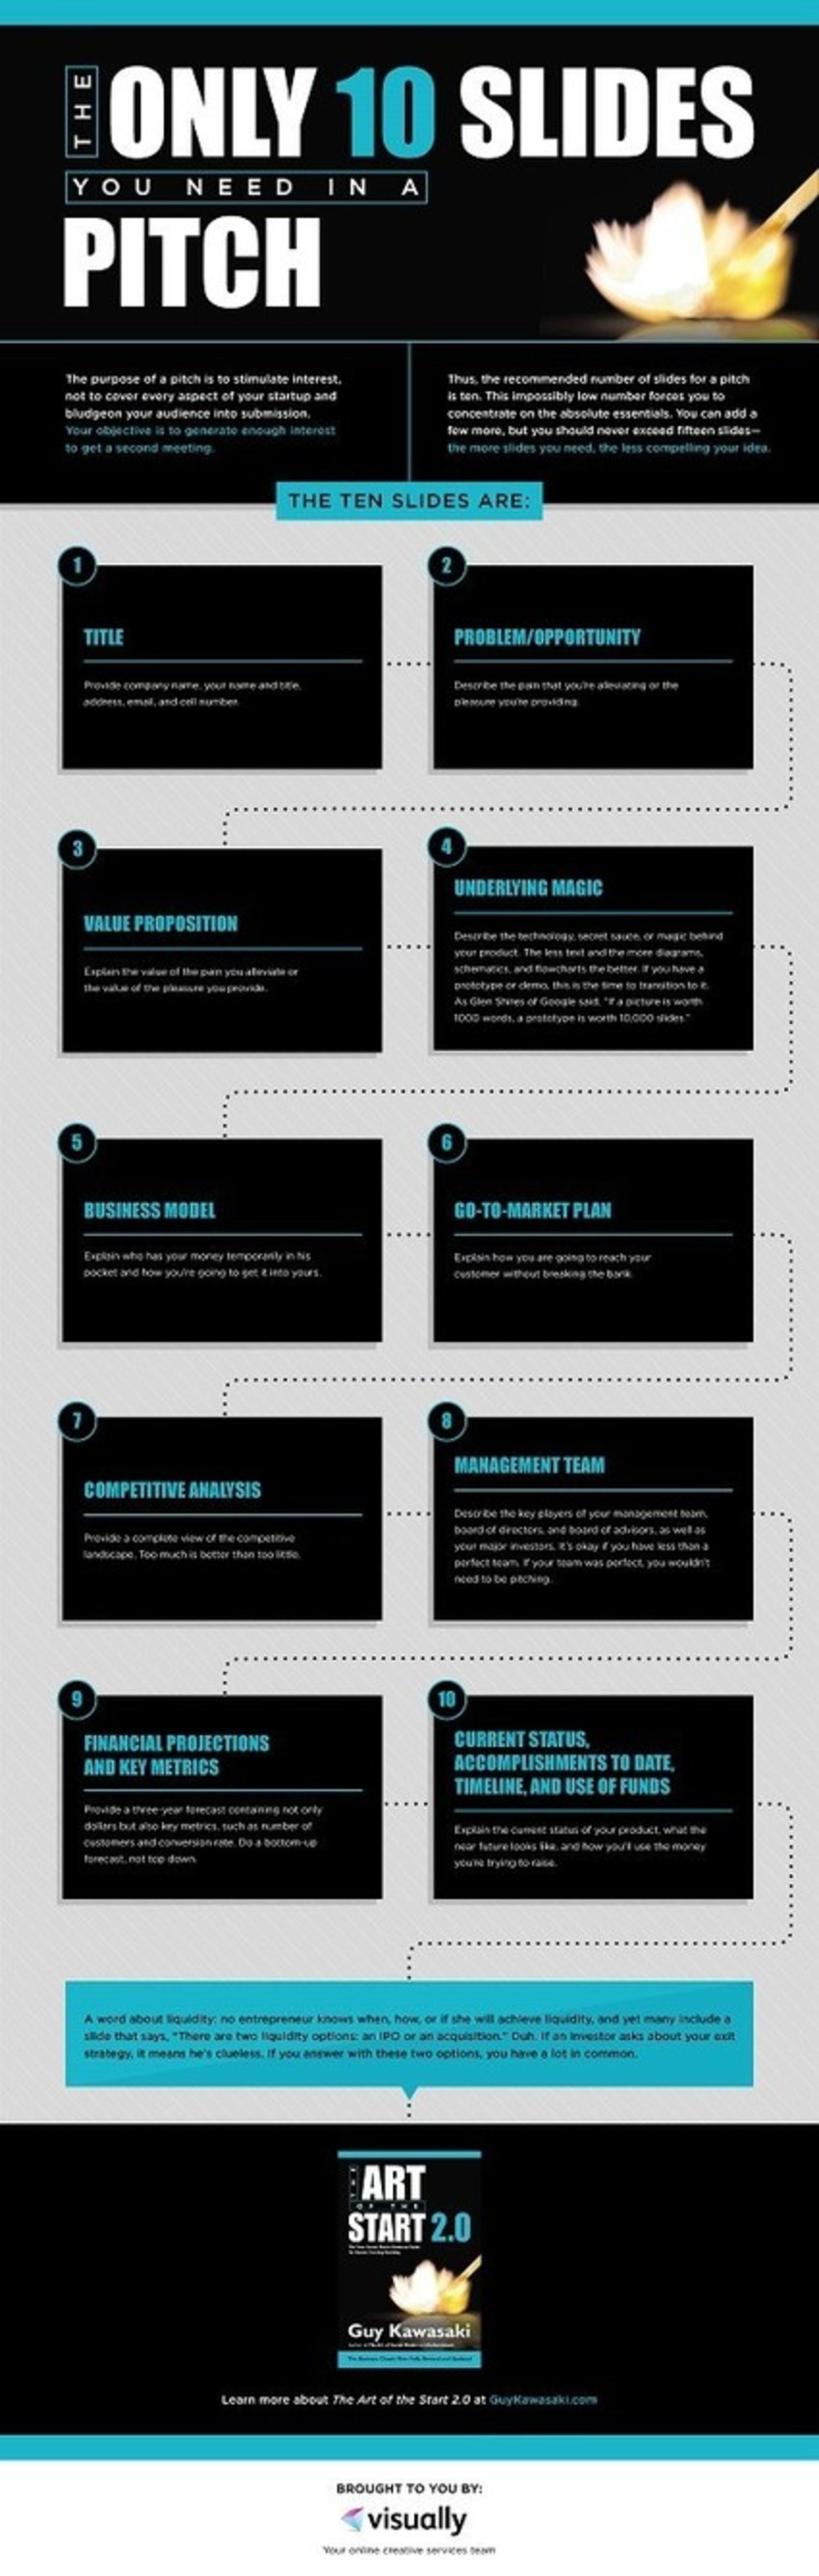 The Only 10 Slides You Need in a Pitch [Infographic] - Profs | The MarTech Digest | Scoop.it